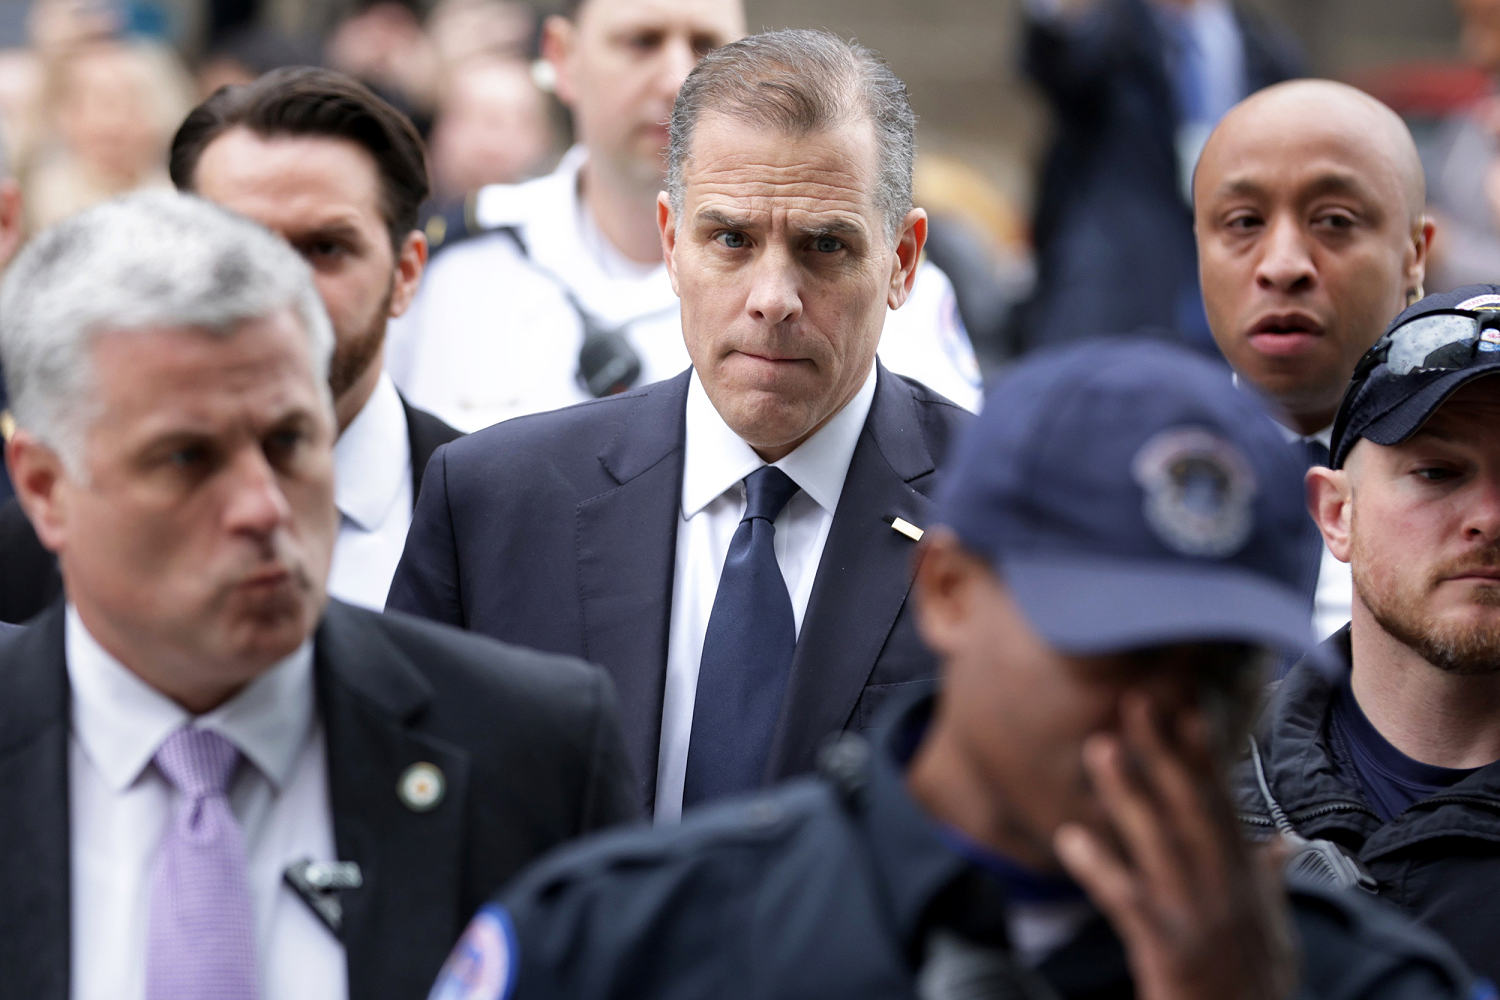 Judge rejects Hunter Biden's bid to dismiss the federal gun charges against him